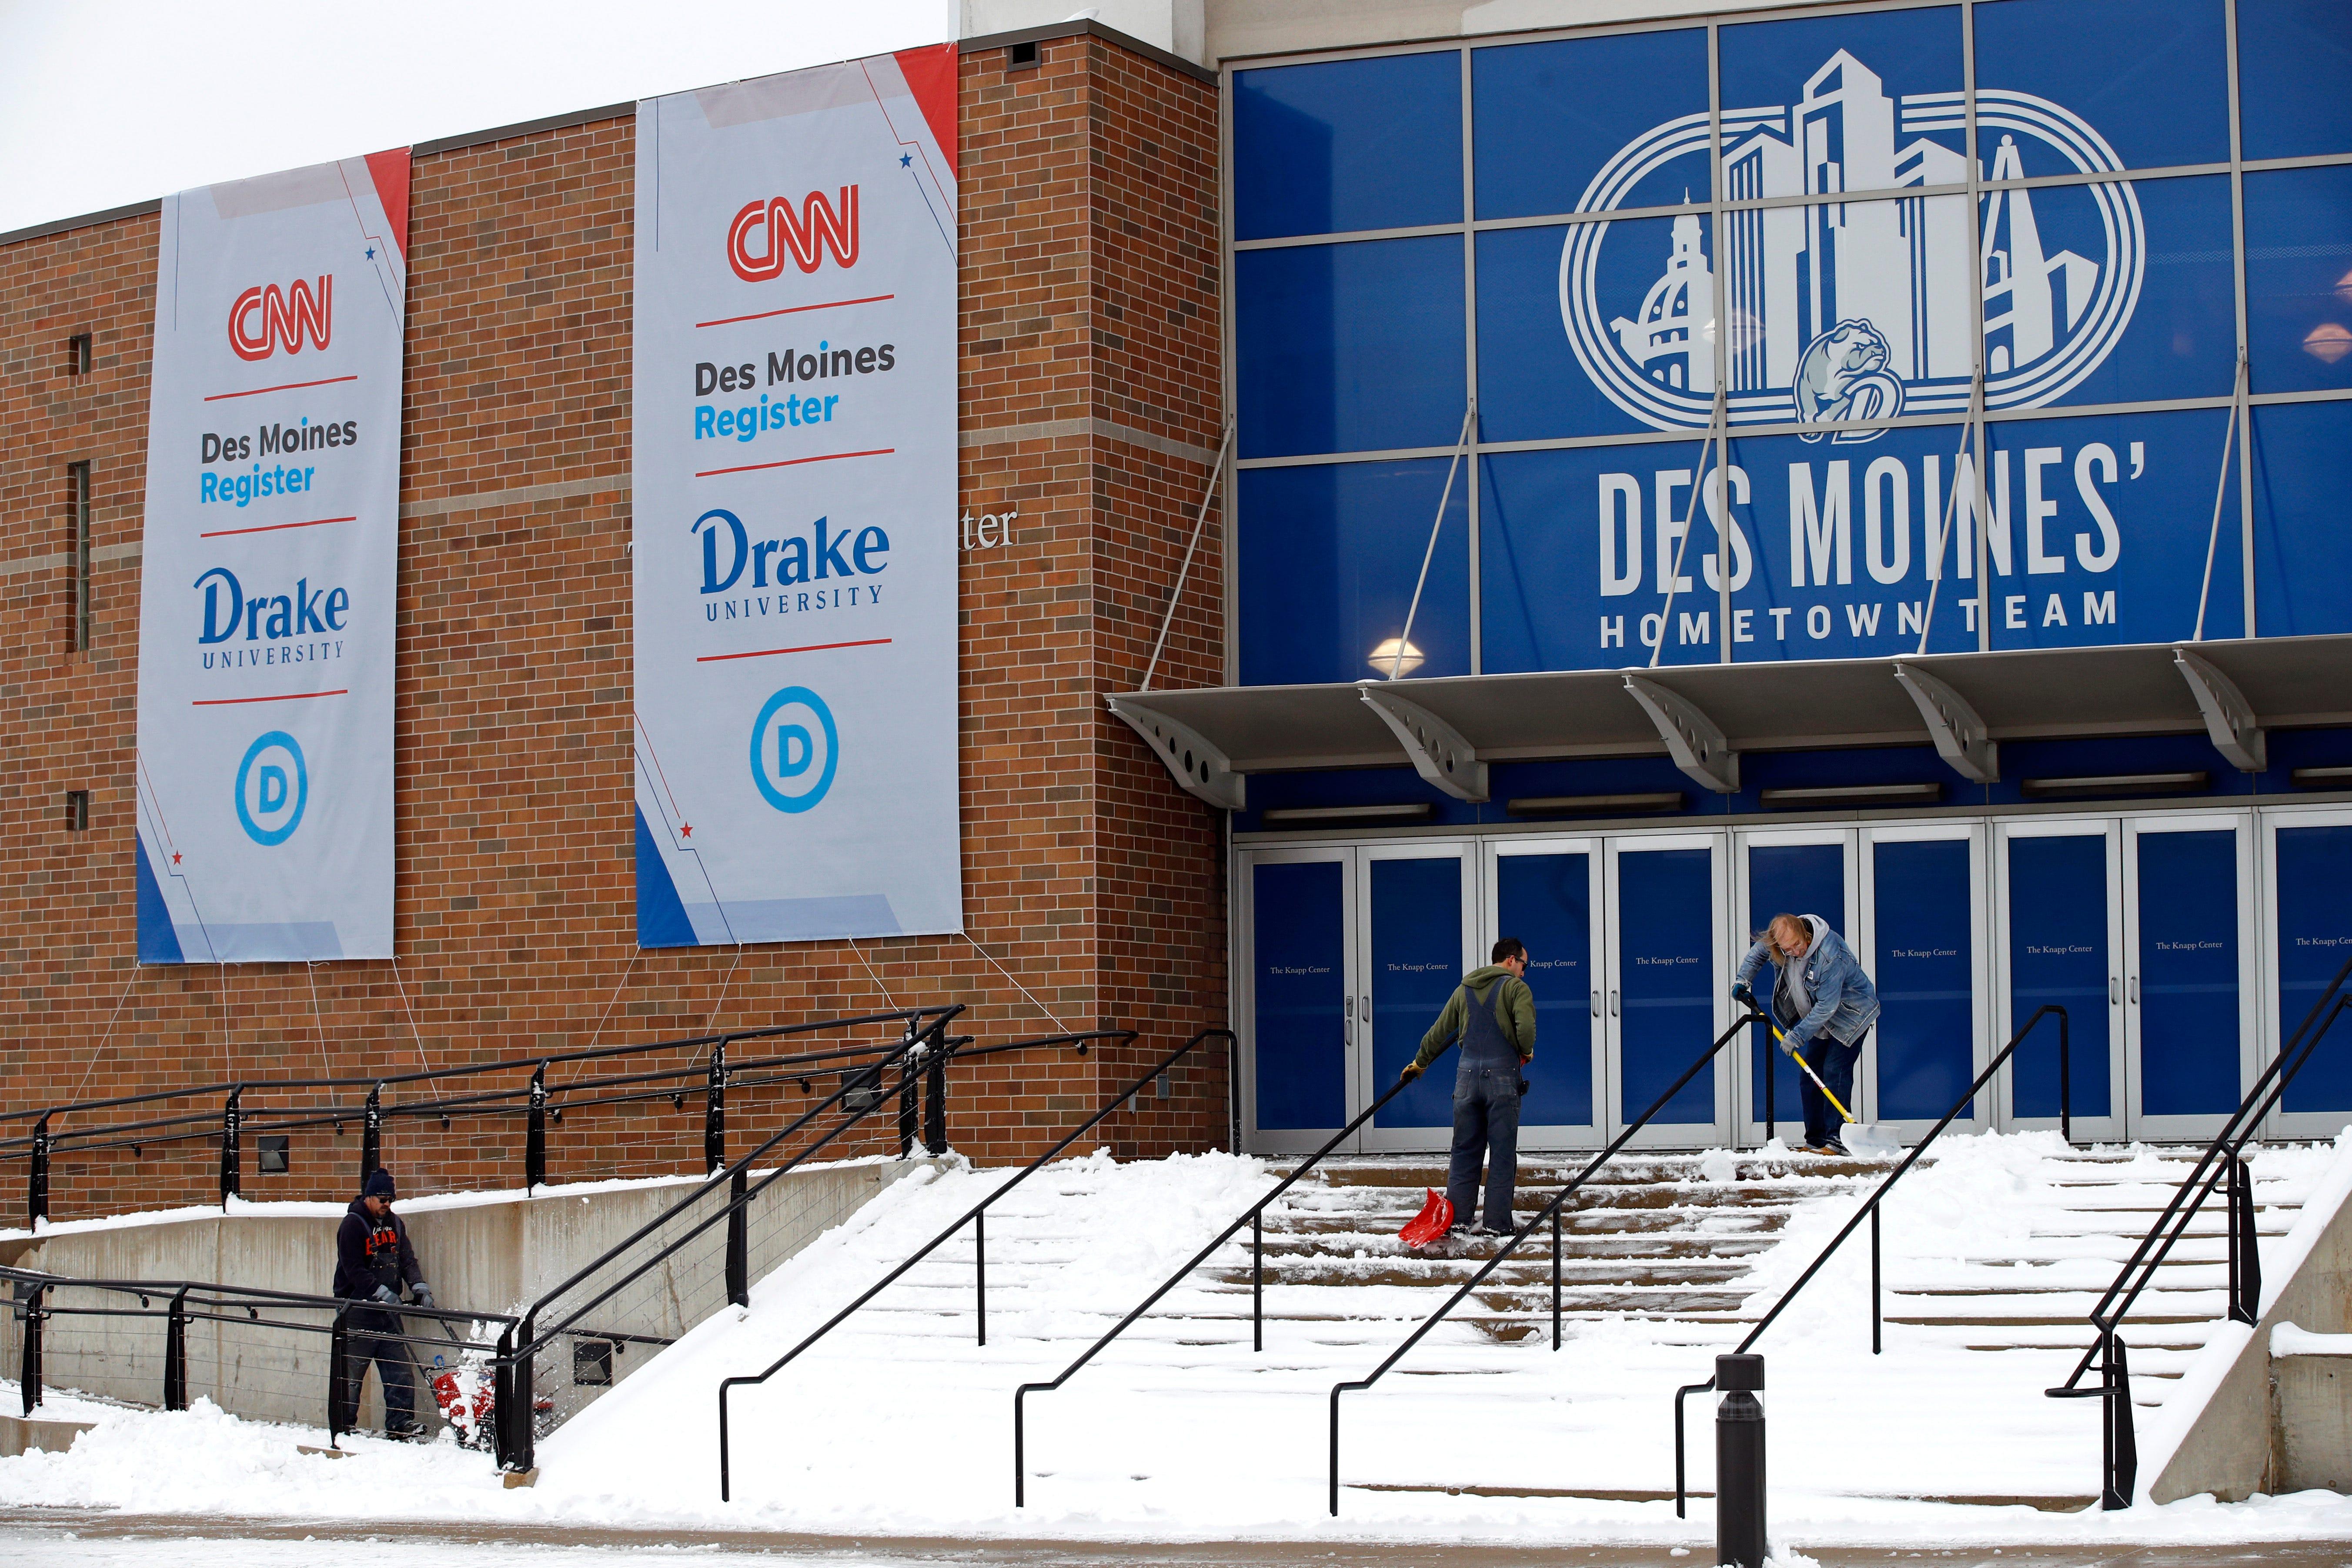 The upcoming GOP debate will be held at Drake University in Des Moines, Iowa.